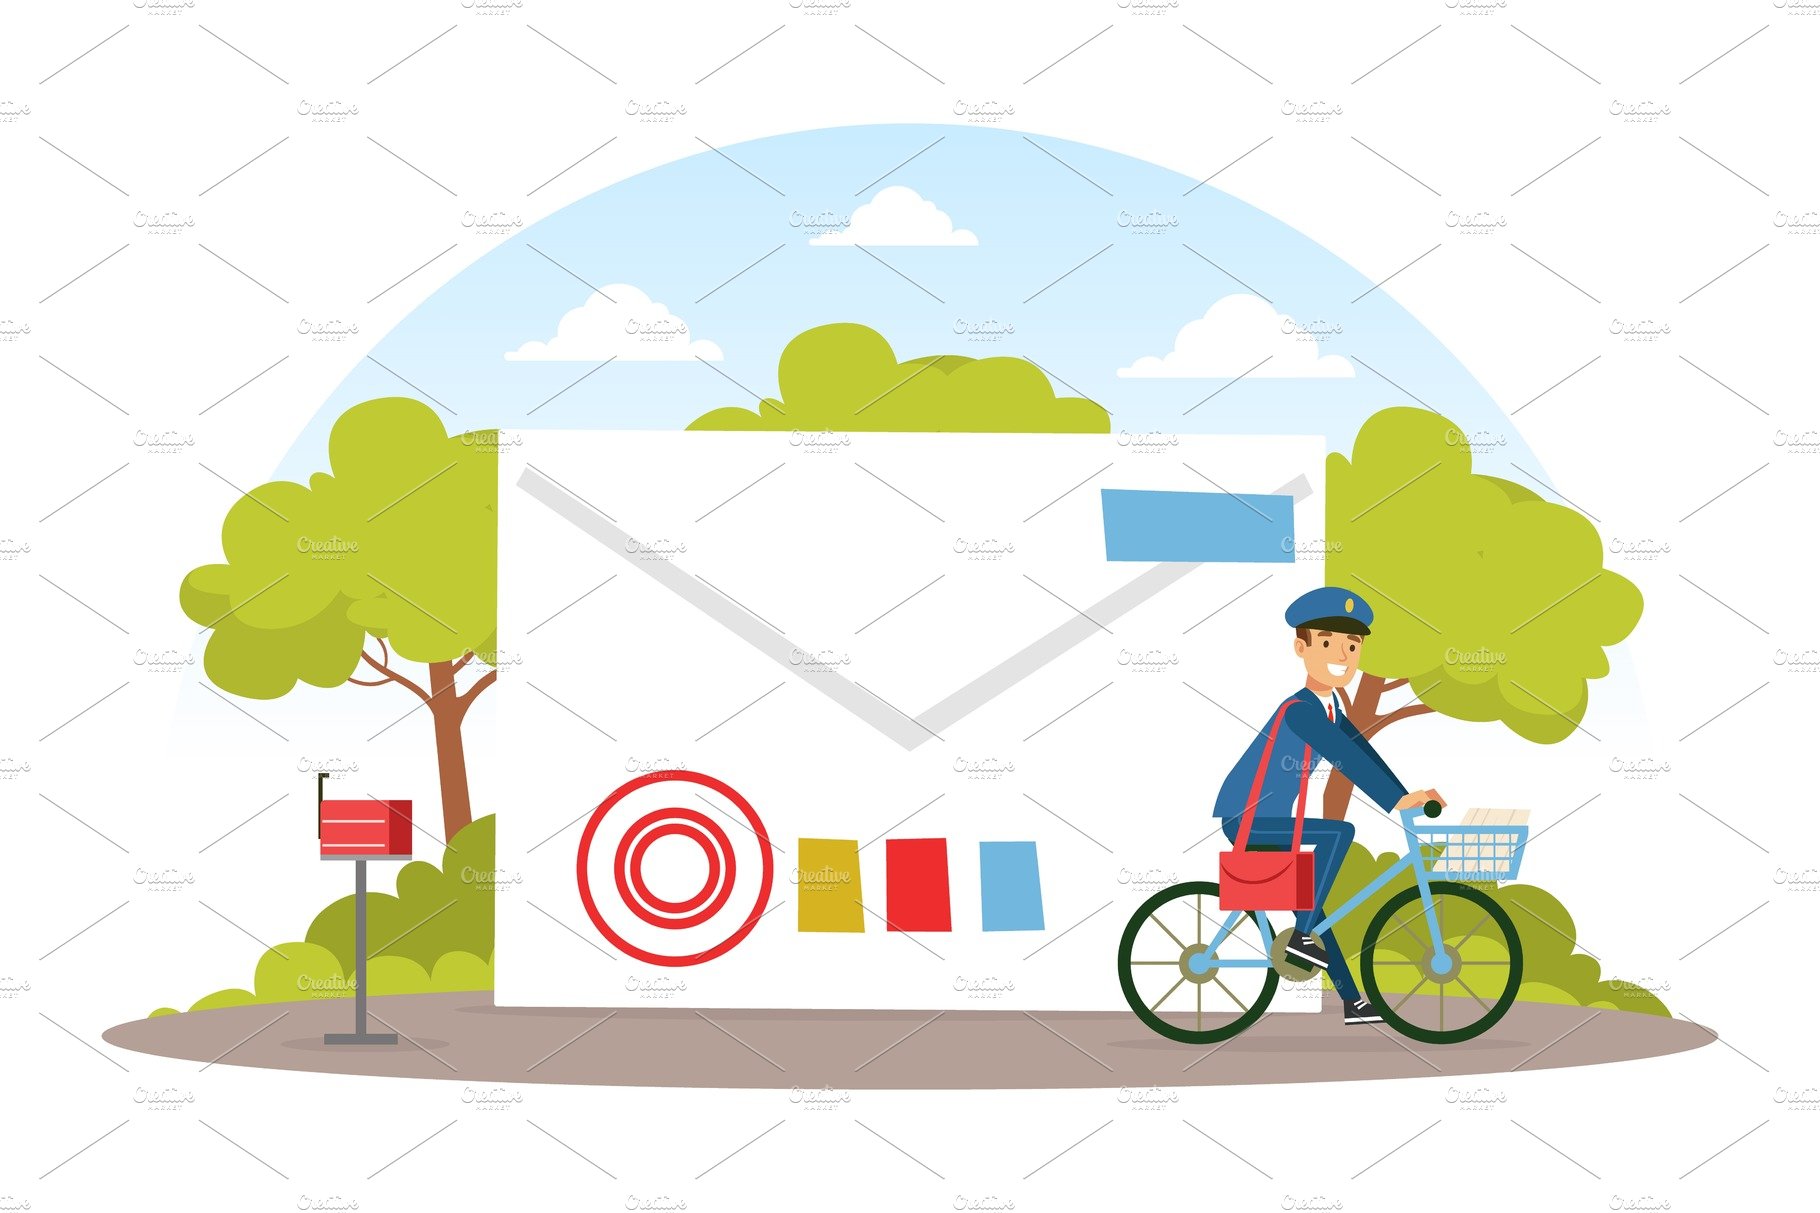 Postman Riding on Bike, Mailman in cover image.